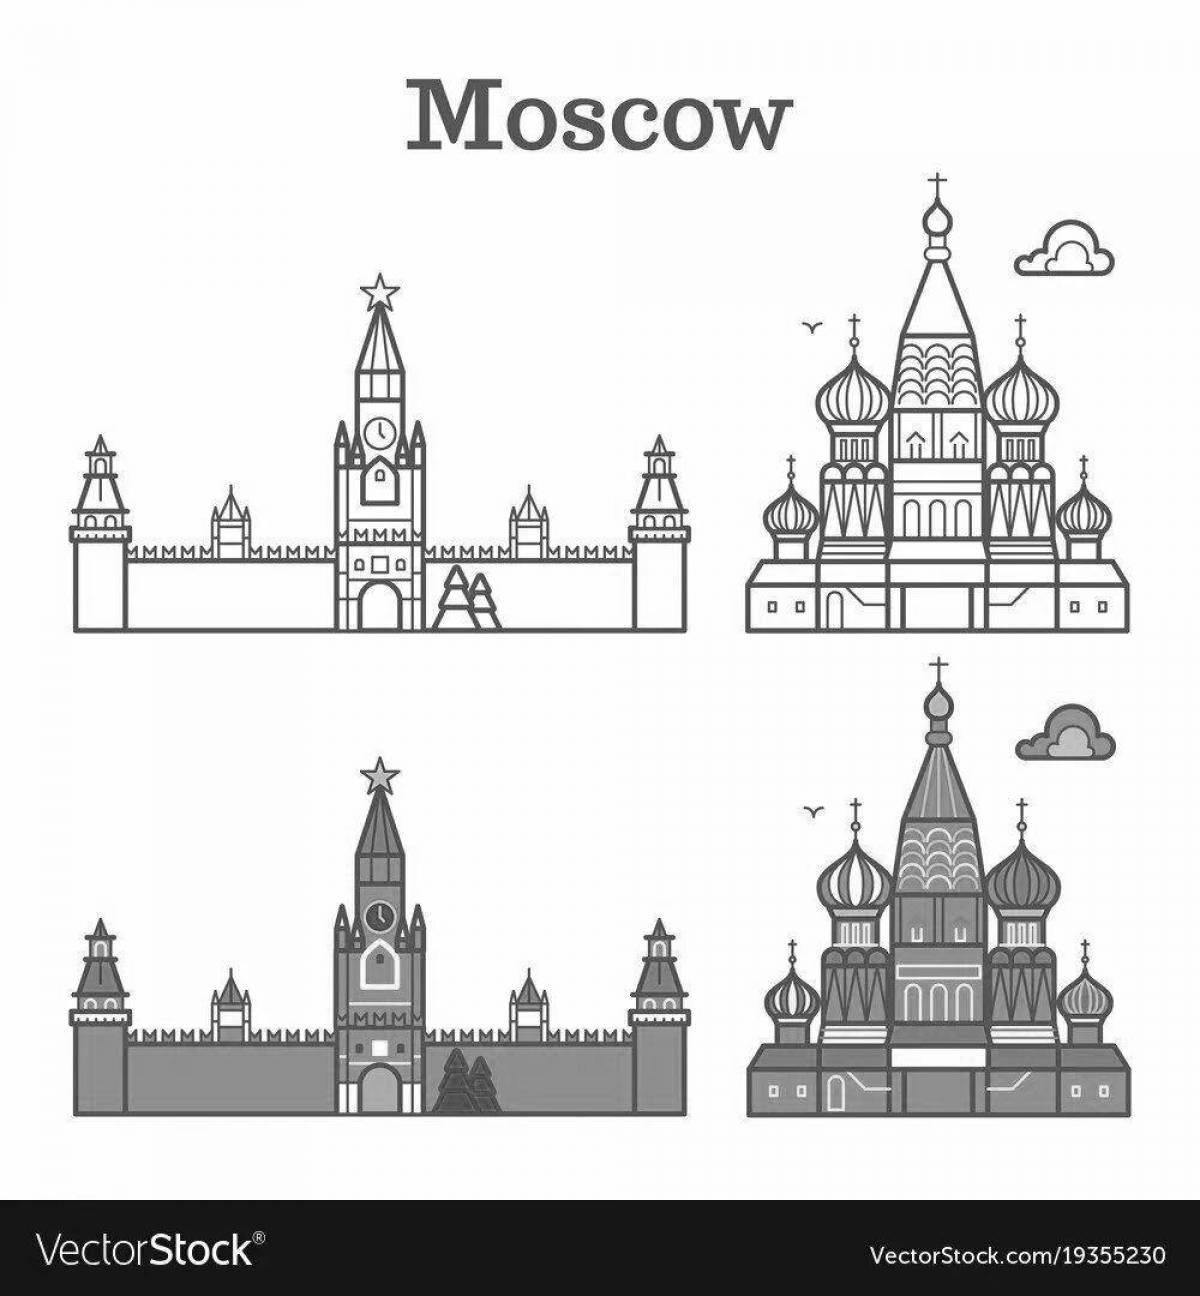 Exquisite coloring of Moscow, the capital of Russia for children